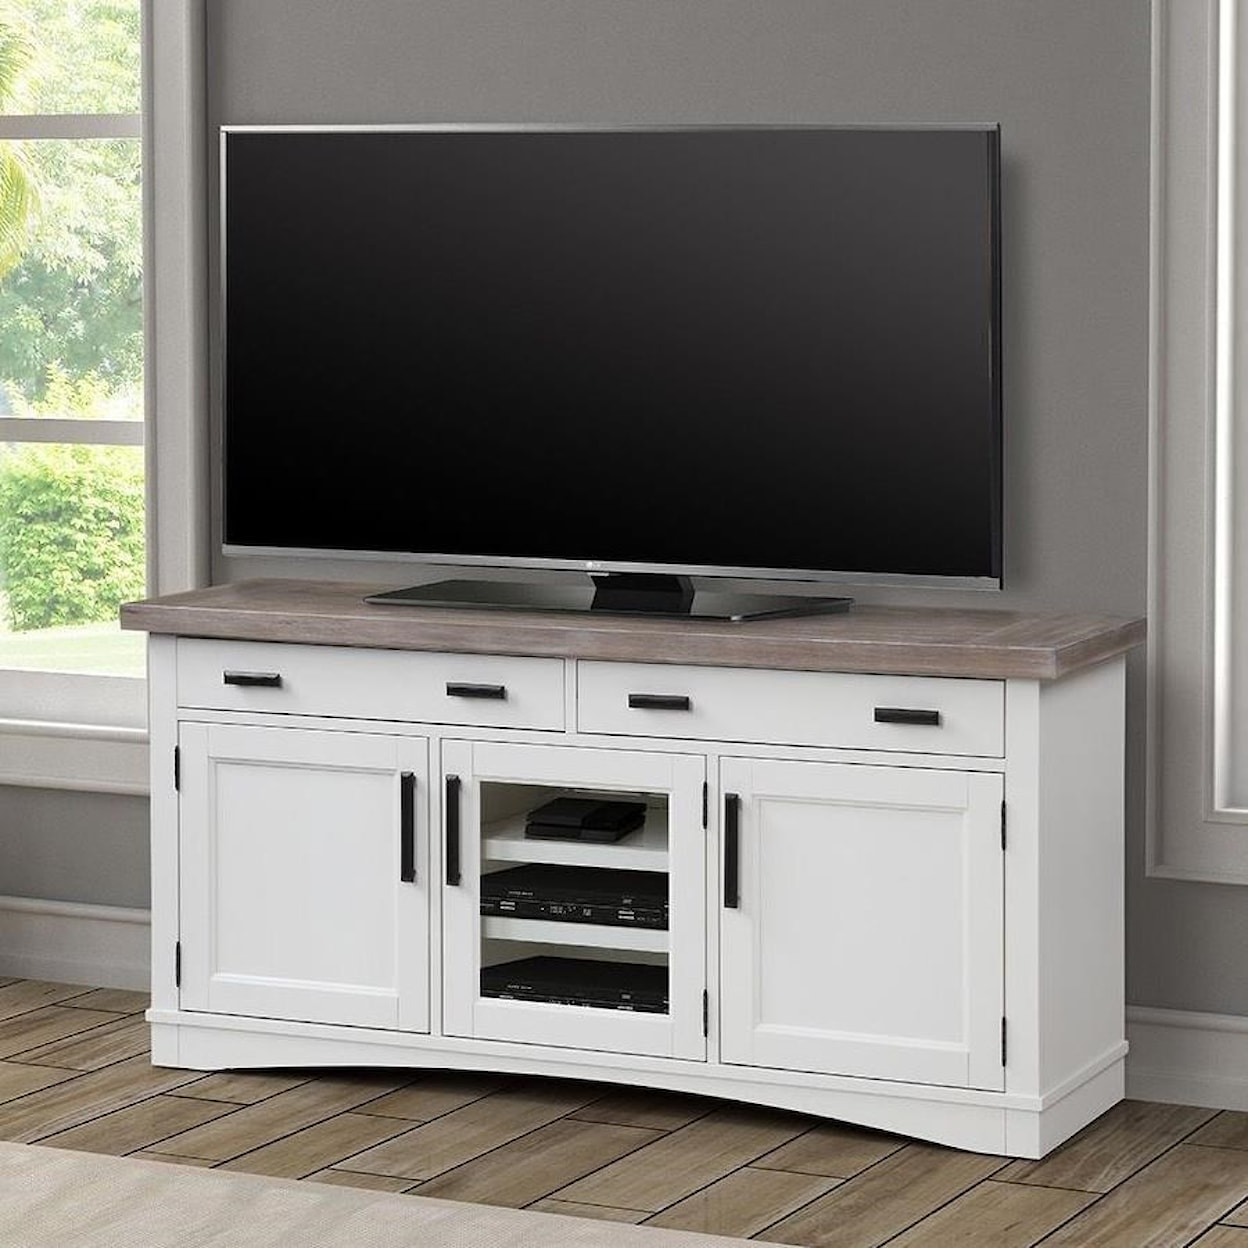 Parker House Americana Modern 63" TV Console with Power Center